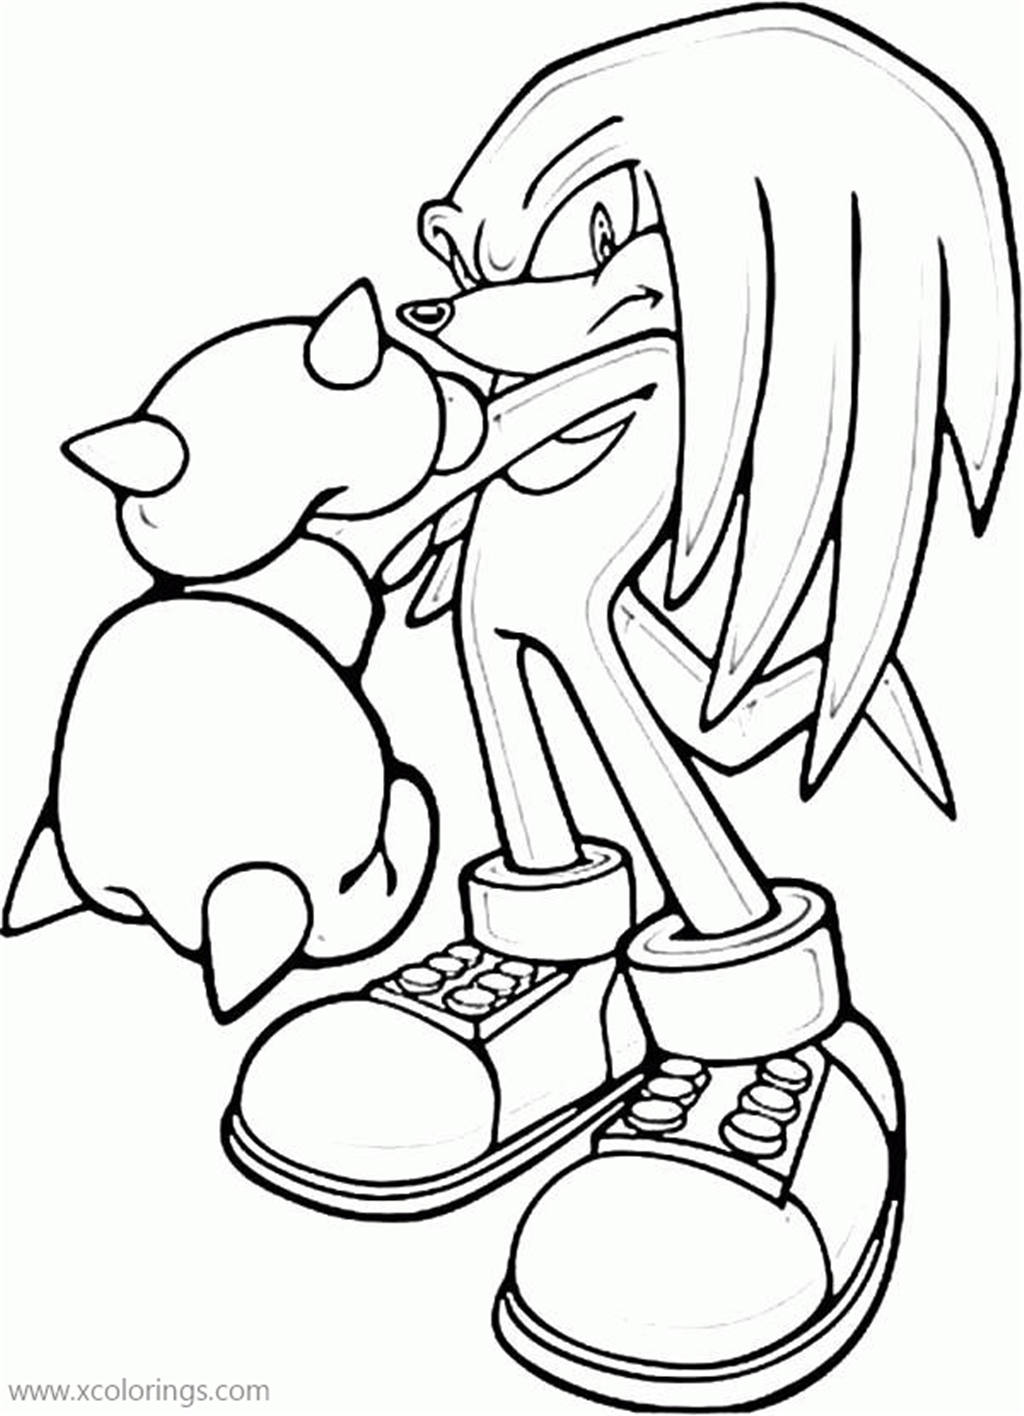 knuckles-coloring-page-from-sonic-the-hedgehog-xcolorings